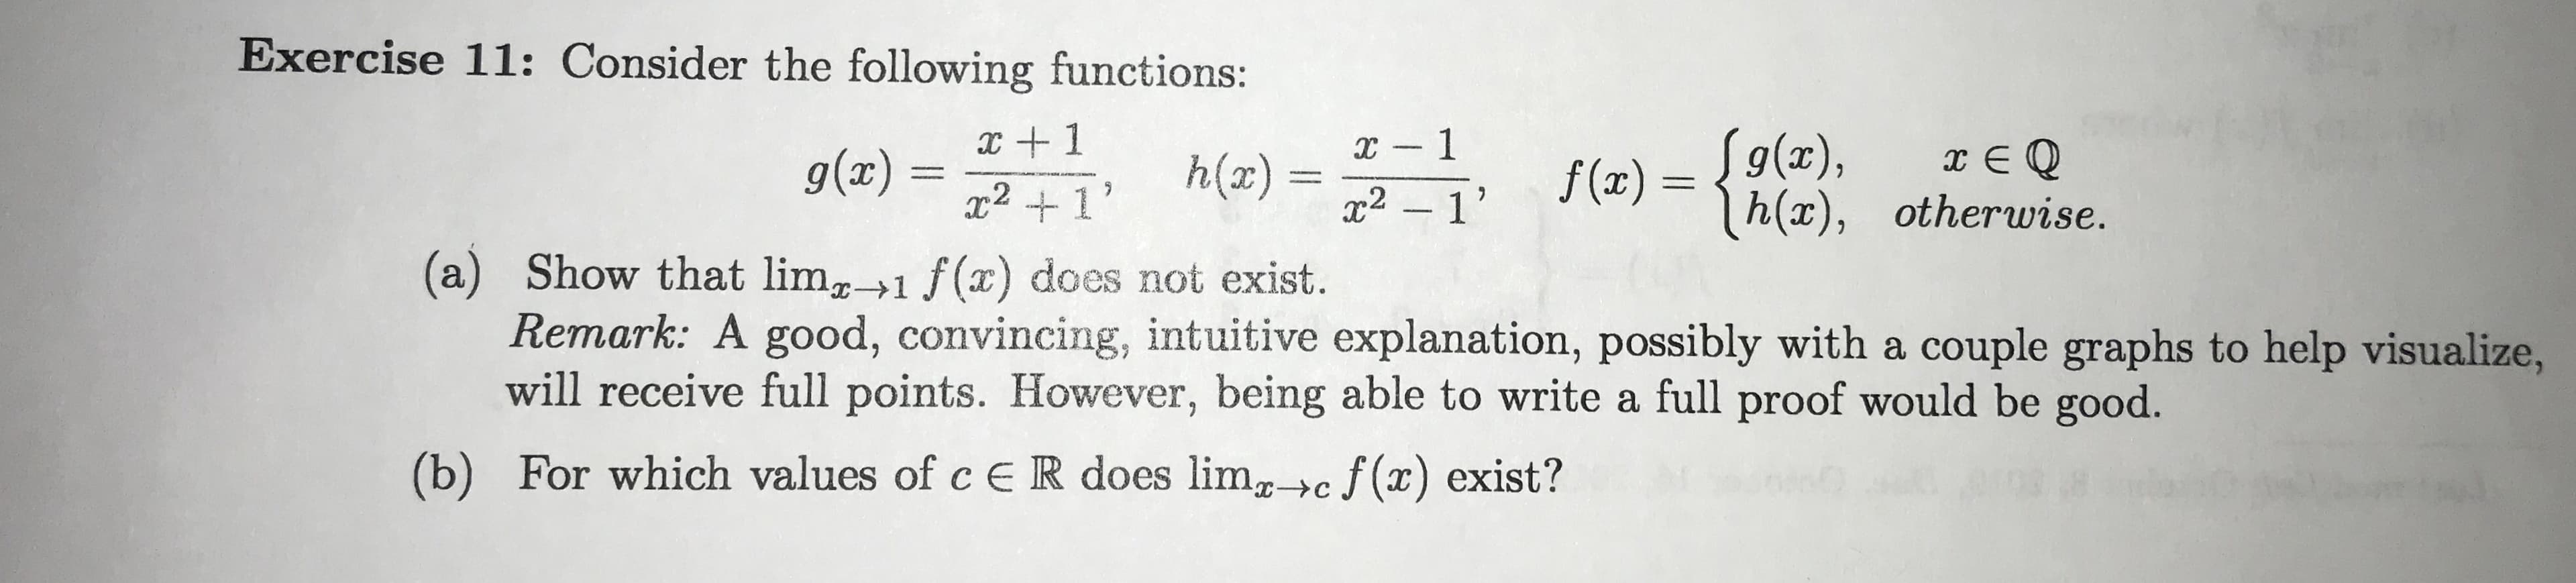 Exercise 11: Consider the following functions:
x -1
2 1
1
S9(x),
h(x), otherwise.
g(x)
h(x) =
f (x)
x21
(a) Show that limg1 f(x) does not exist.
Remark: A good, convincing, intuitive explanation, possibly with a couple graphs to help visualize,
will receive full points. However, being able to write a full proof would be good.
(b) For which values of c ER does lim>c f(x) exist?
